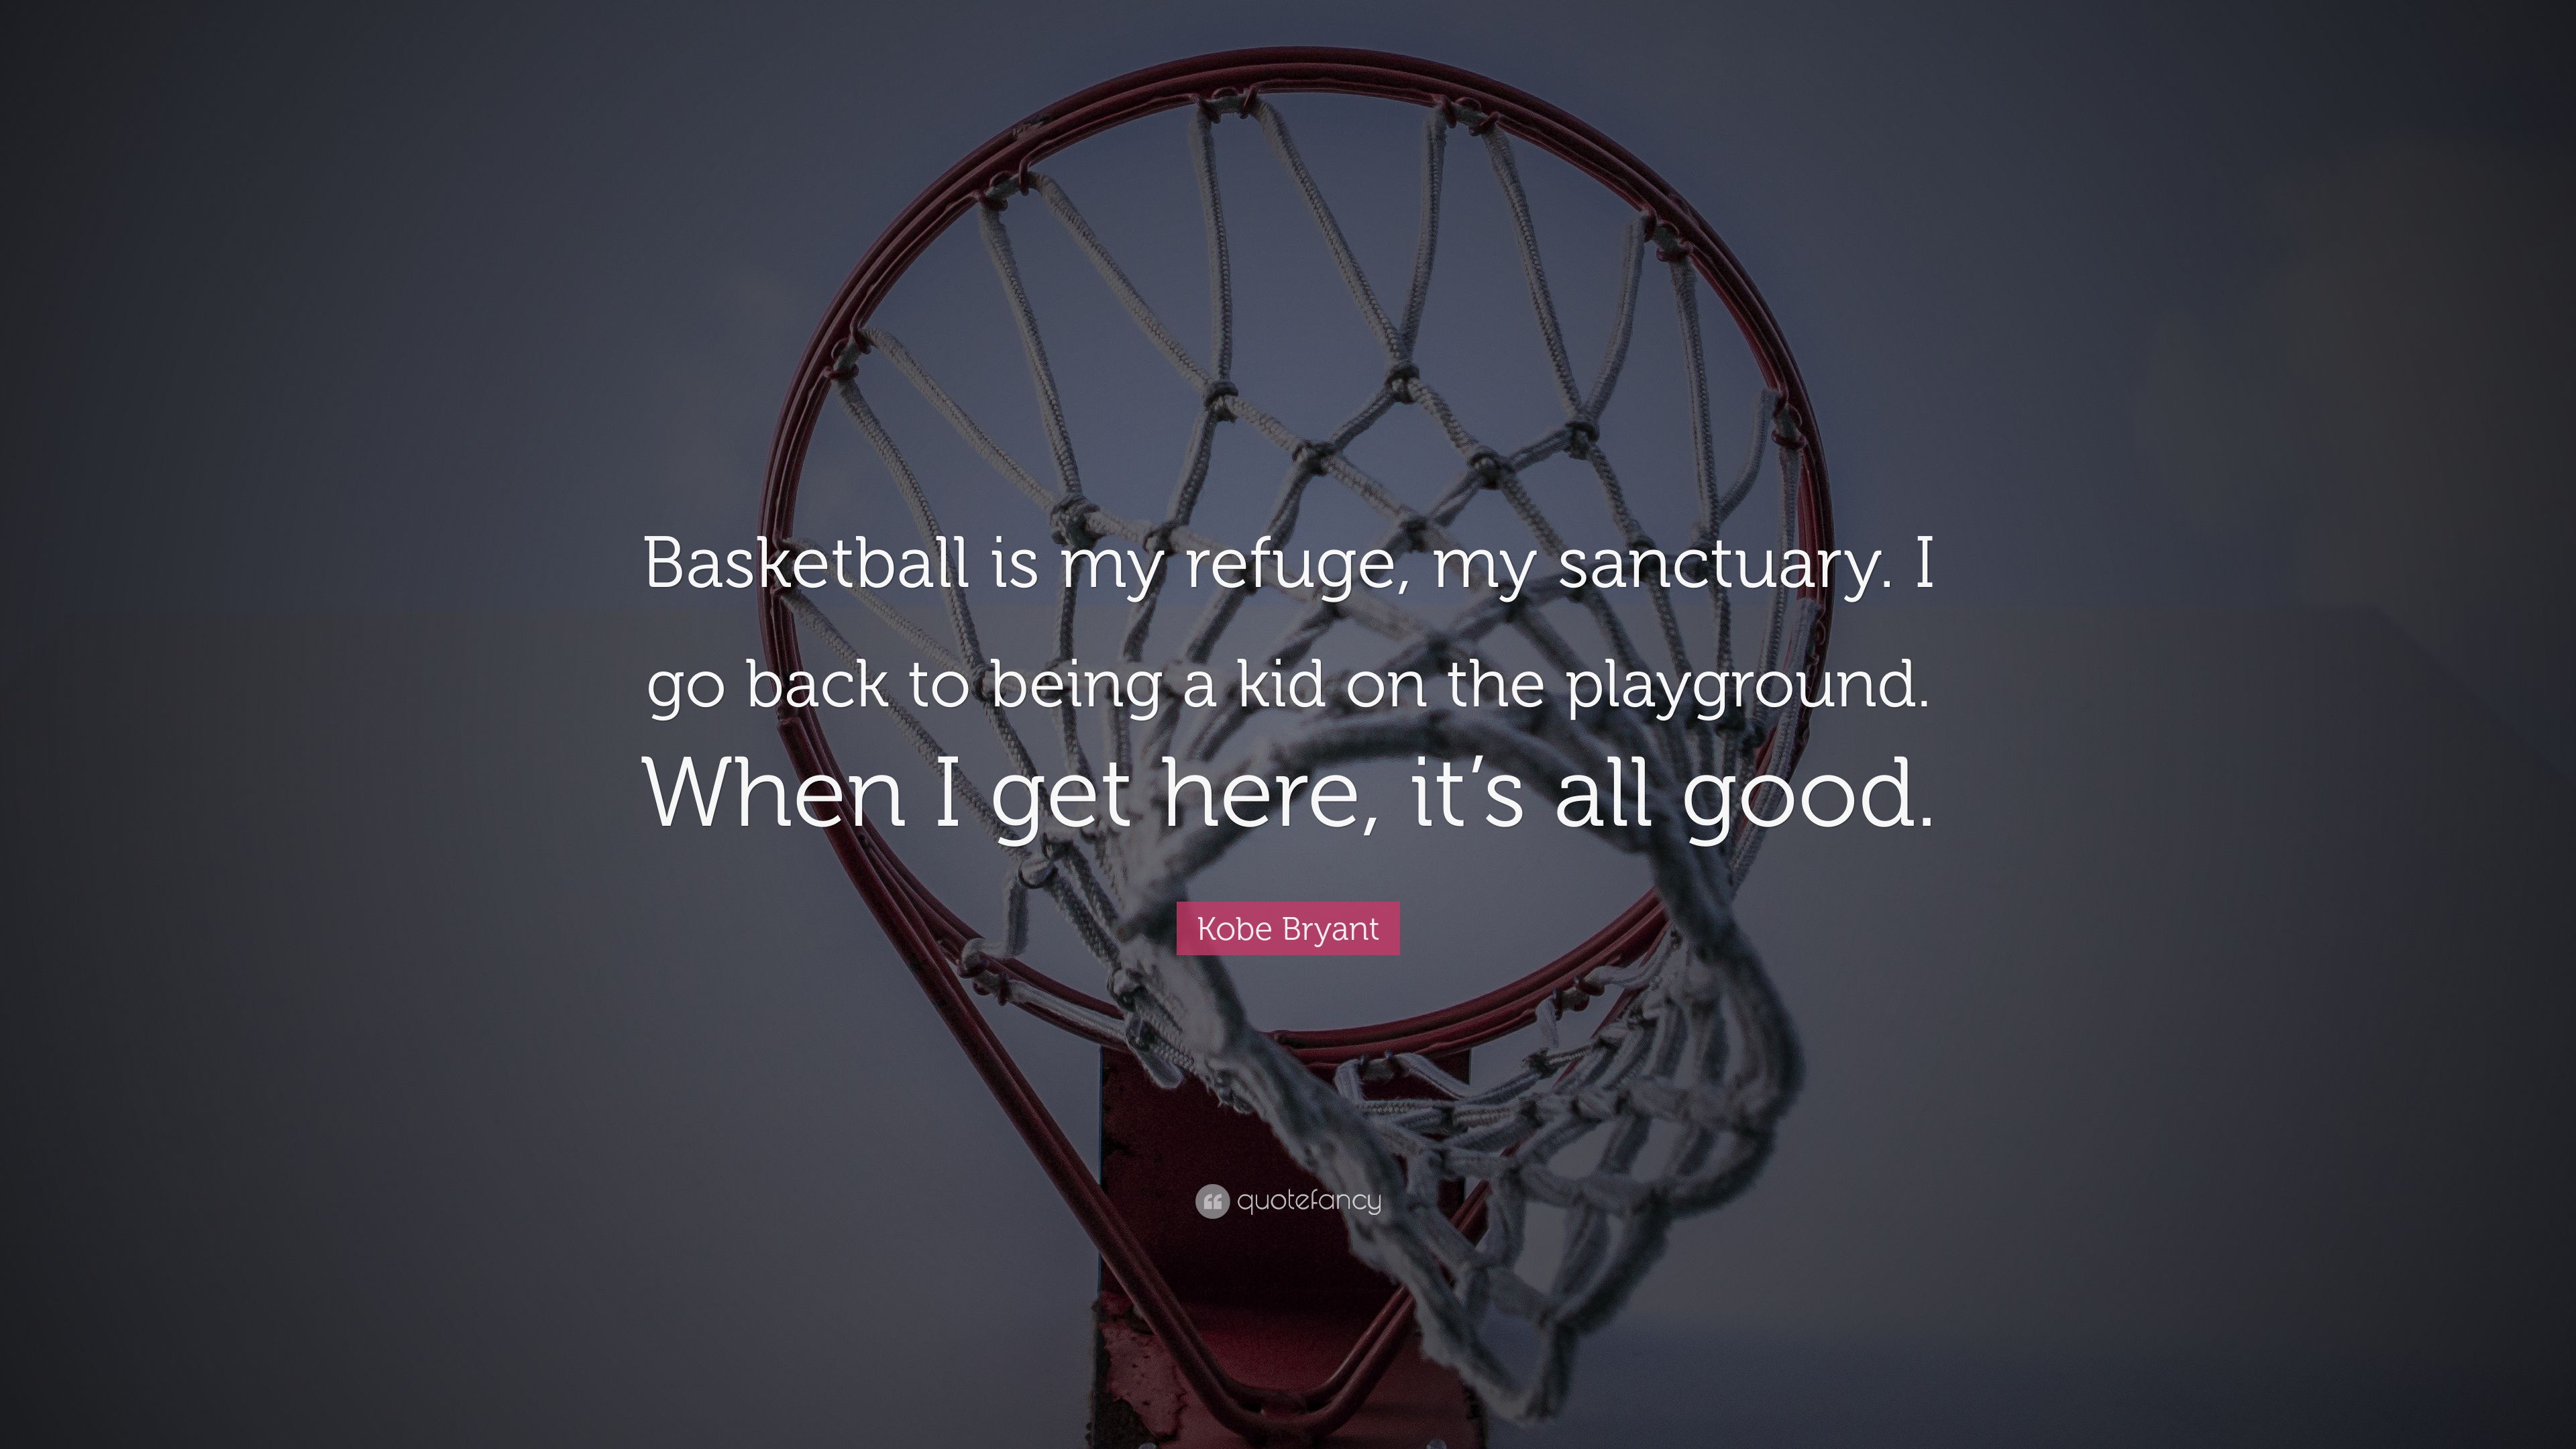 Kobe Bryant Quote: “Basketball is my refuge, my sanctuary. I go back to being a kid on the playground. When I get here, it's all good.” (12 wallpaper)